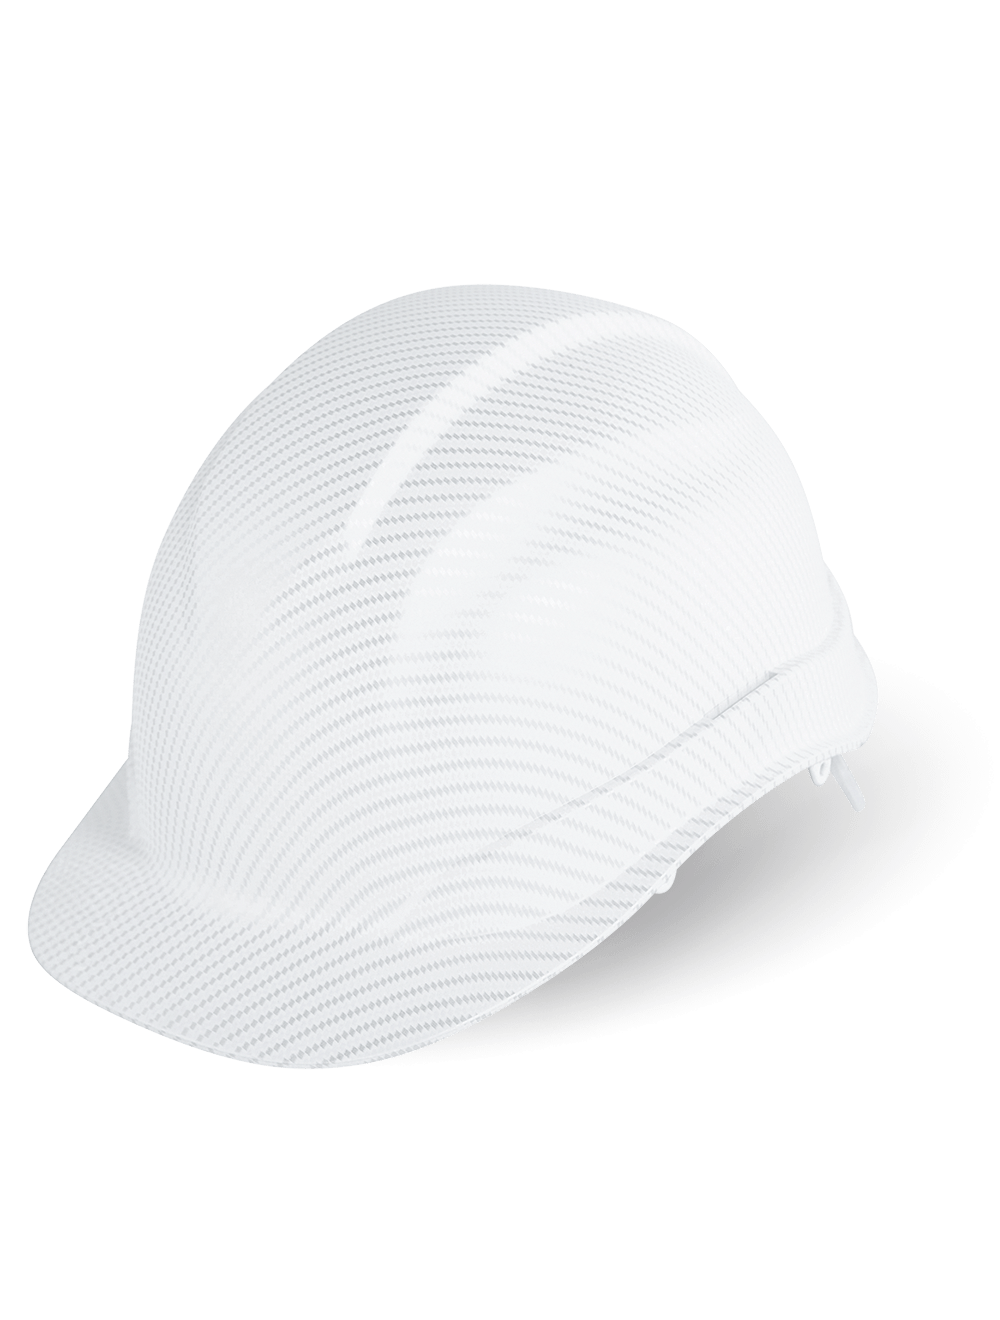 Bullhead Safety™ Head Protection Matte White Graphite Unvented Cap Style Hard Hat With Six-Point Ratchet Suspension - HH-C2-C